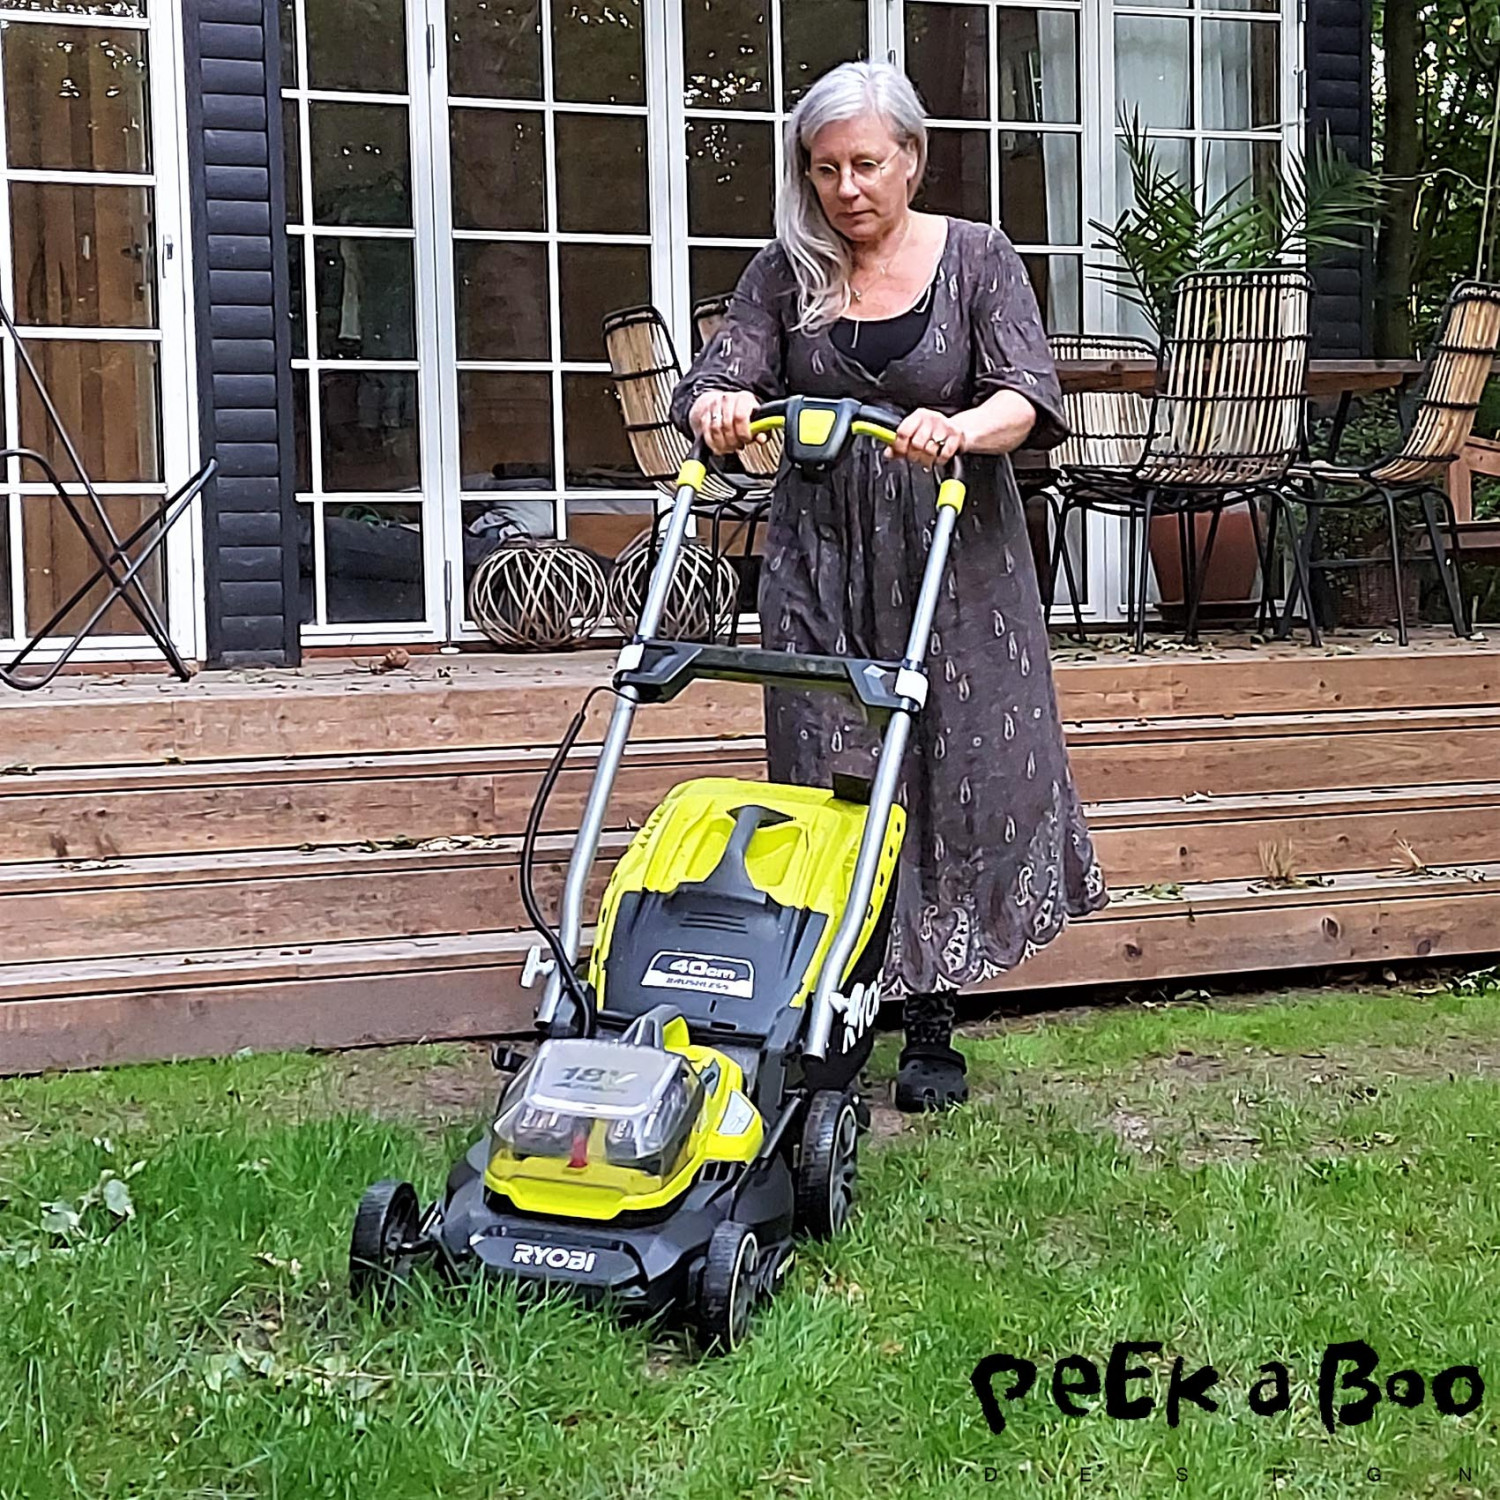 The Ryobi lawnmover driven on ecofriendly batteries. And with a noise reduction that makes the work really pleasant.